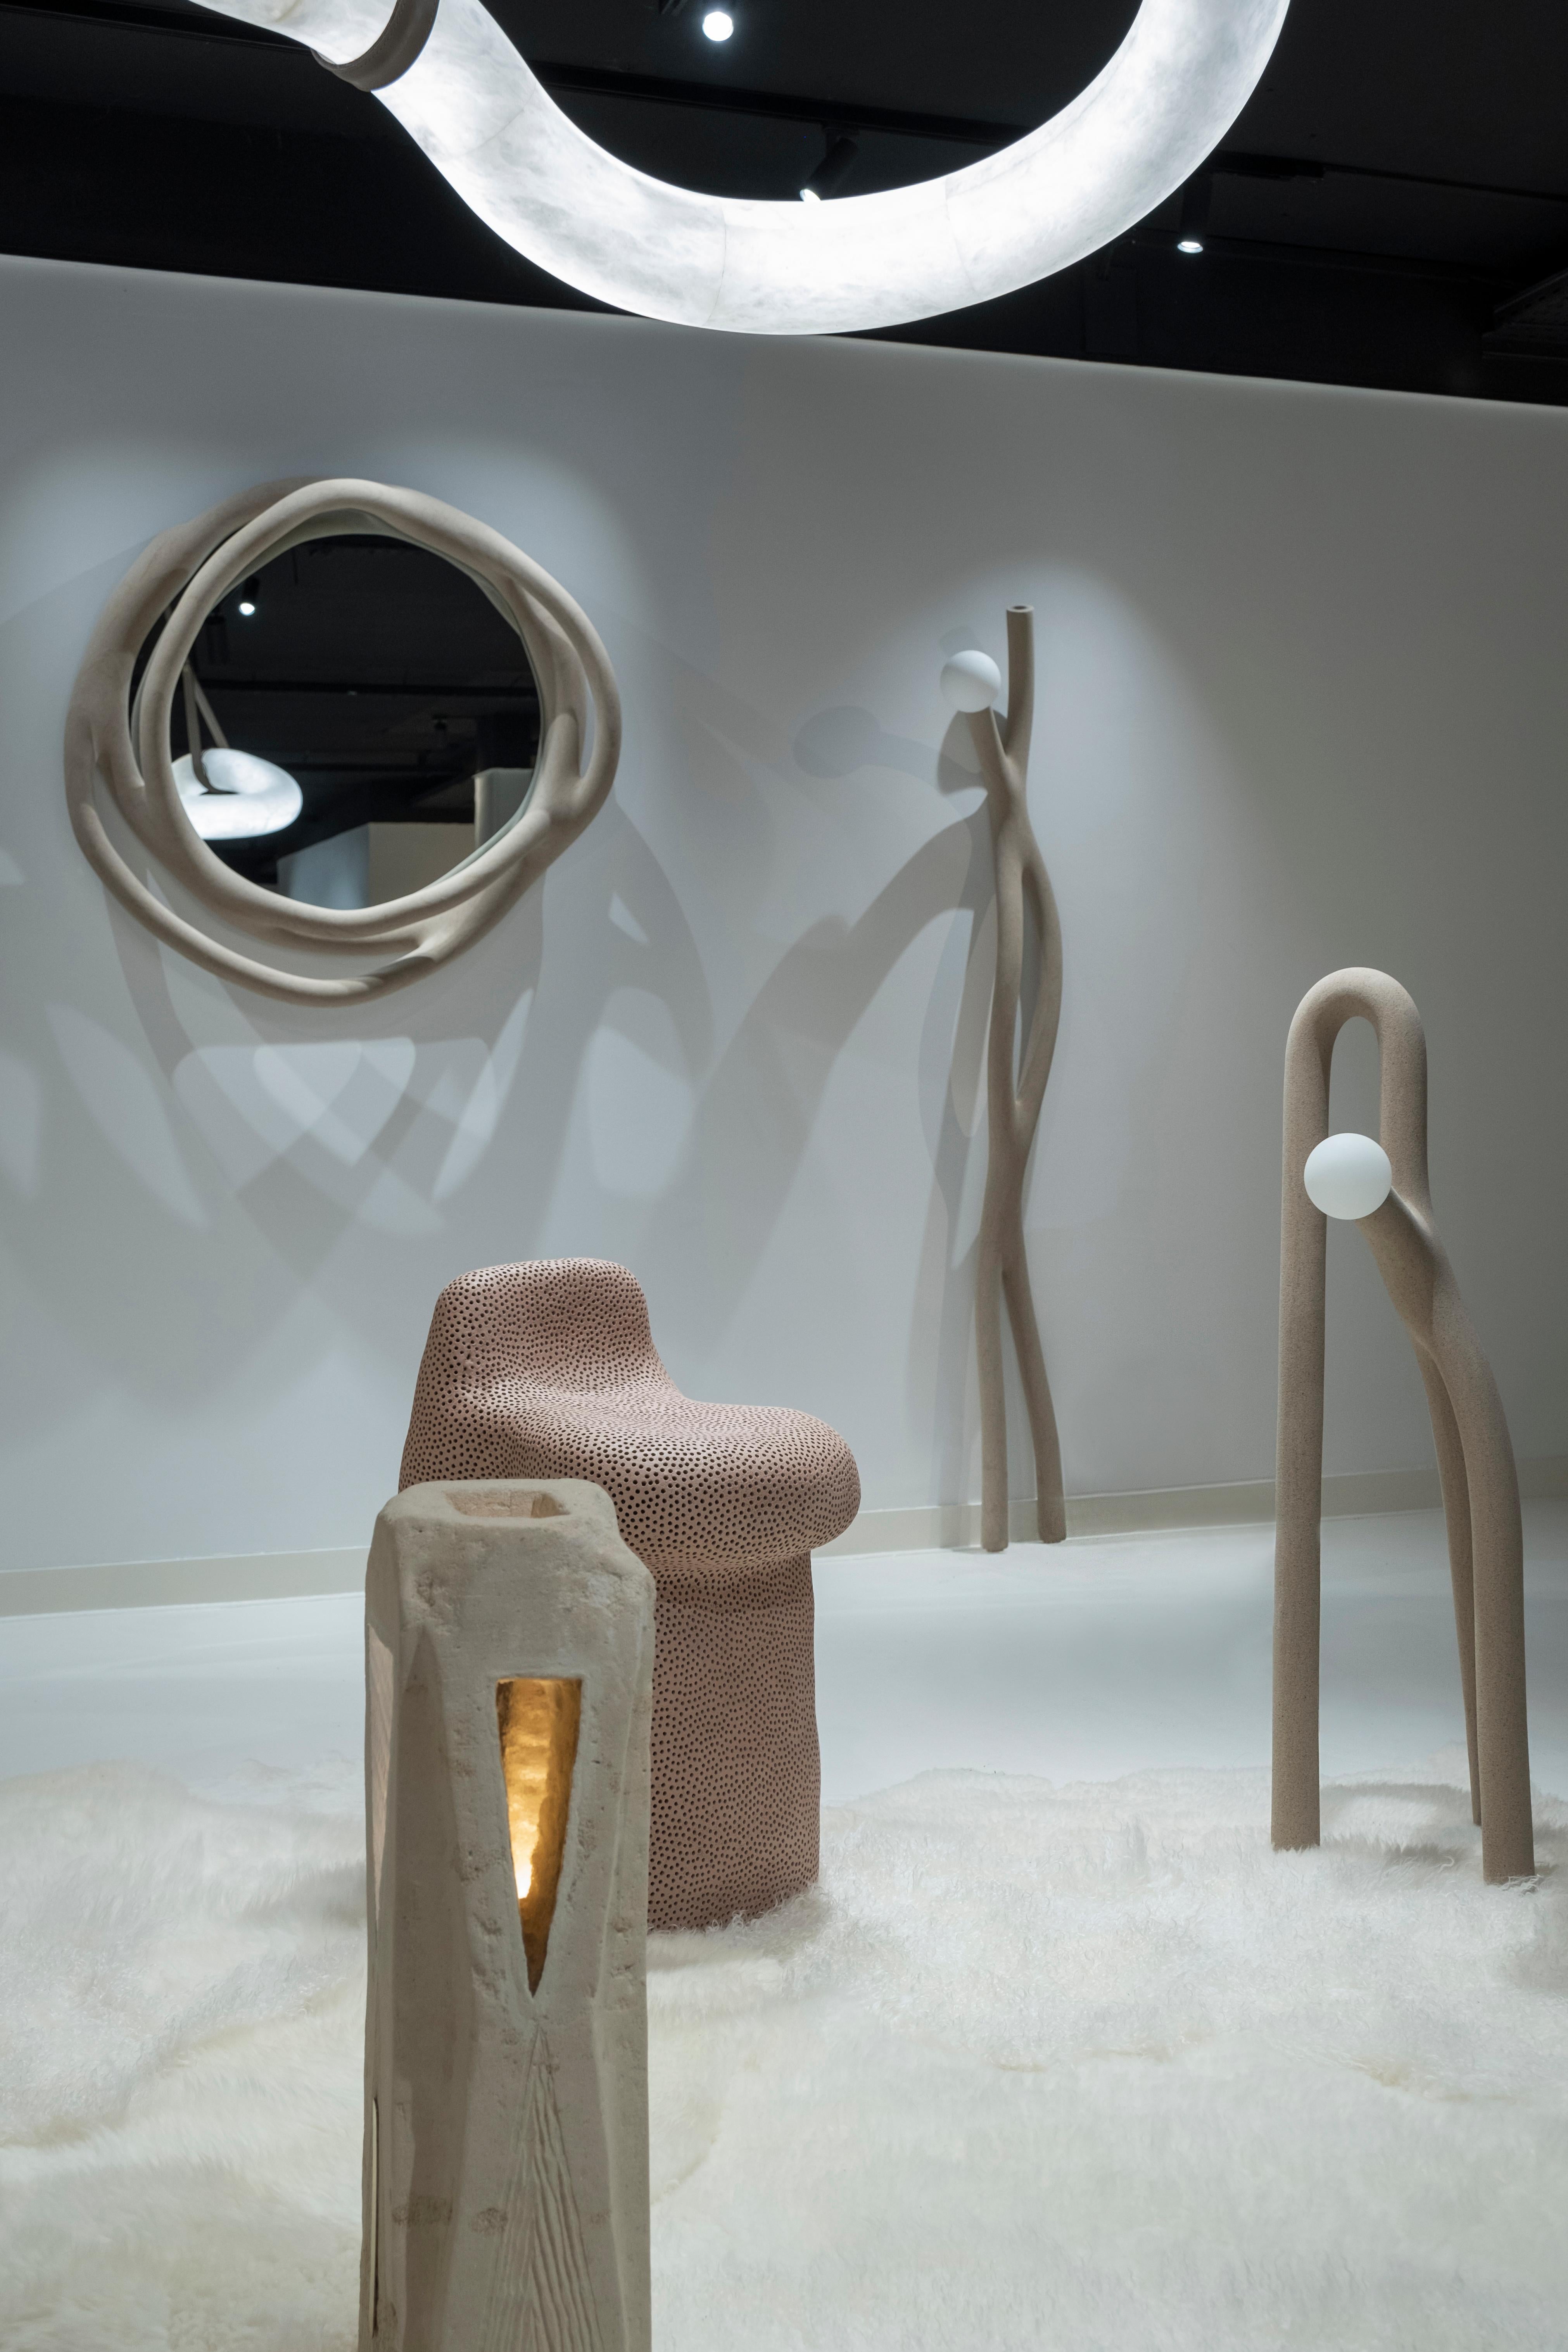 Portal mirror by HWE
Materials: Waste SLS 3D nylon powder, sand from sustainable sources
Dimensions: H 85 x 85 CM.

Also available in other measurements (large, medium and small). Please contact us.

Hot Wire Extensions is a young sustainable design